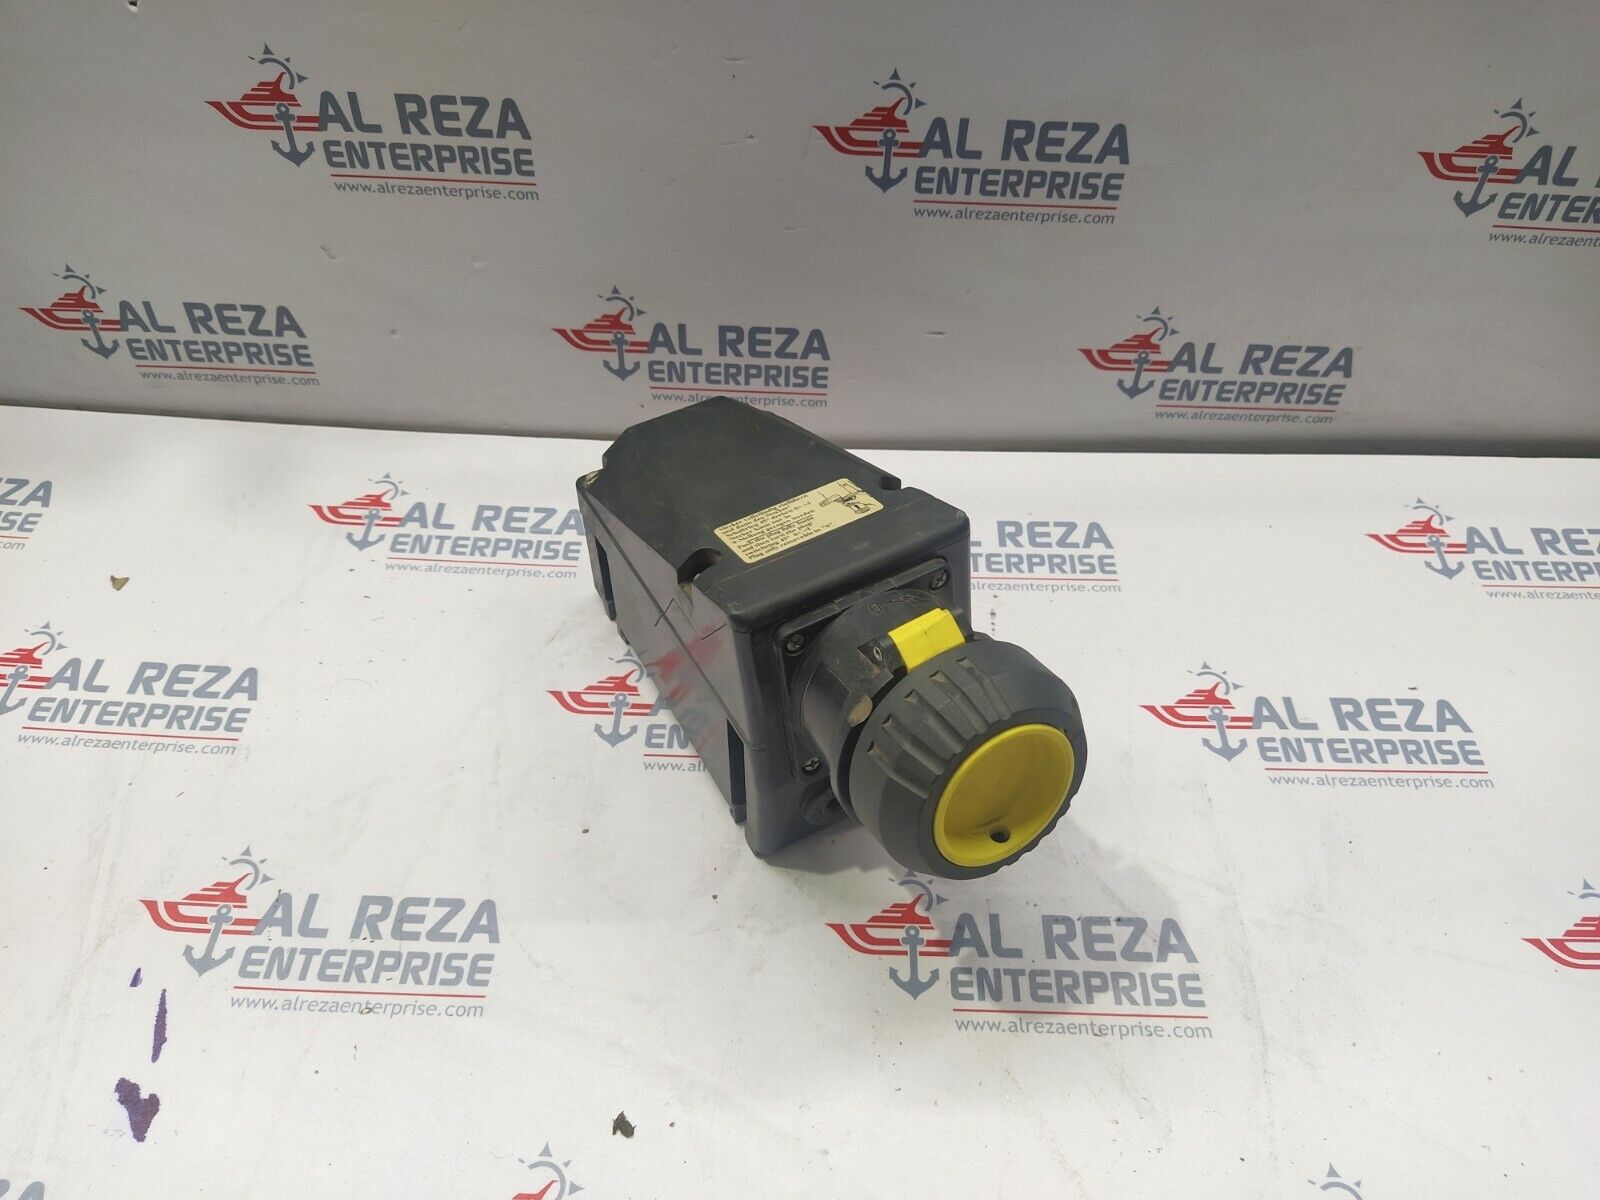 CEAG GHG5114304R0002 SURFACE MOUNT 2P+E POWER CONNECTOR SOCKET ATEX, RATED AT 16